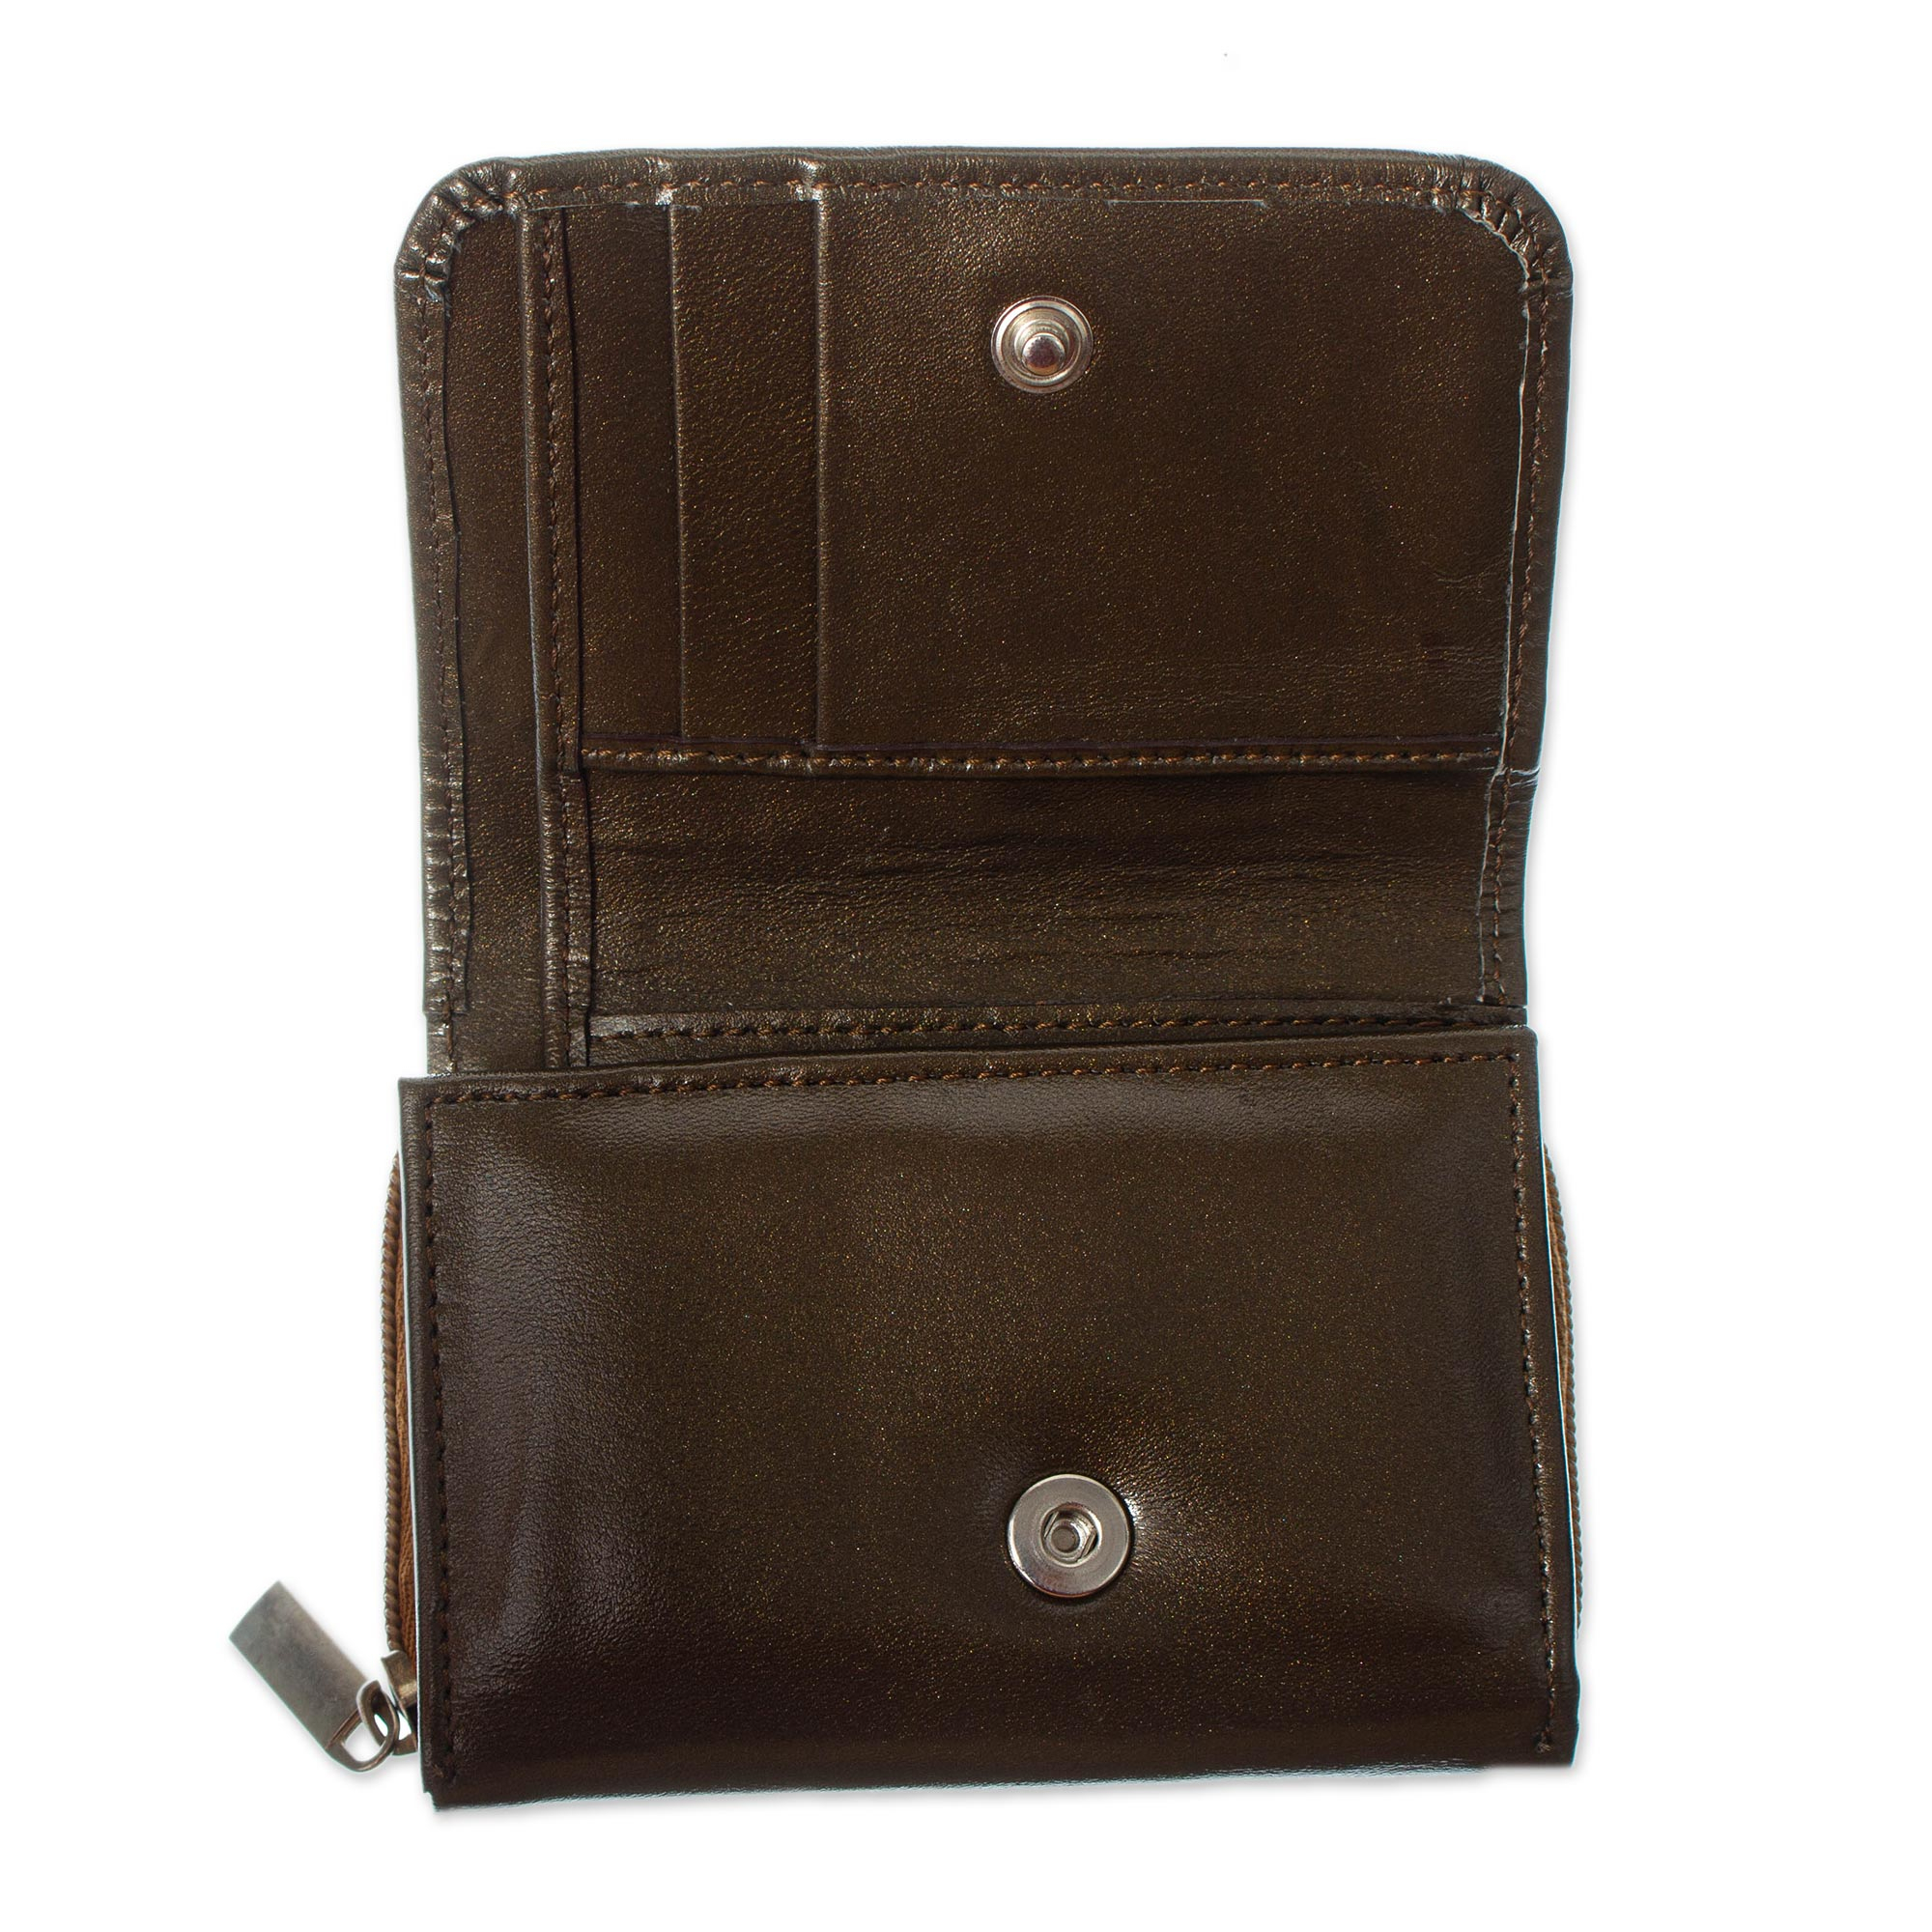 Clay Brown Leather Trifold Wallet - Sierra Clay | NOVICA